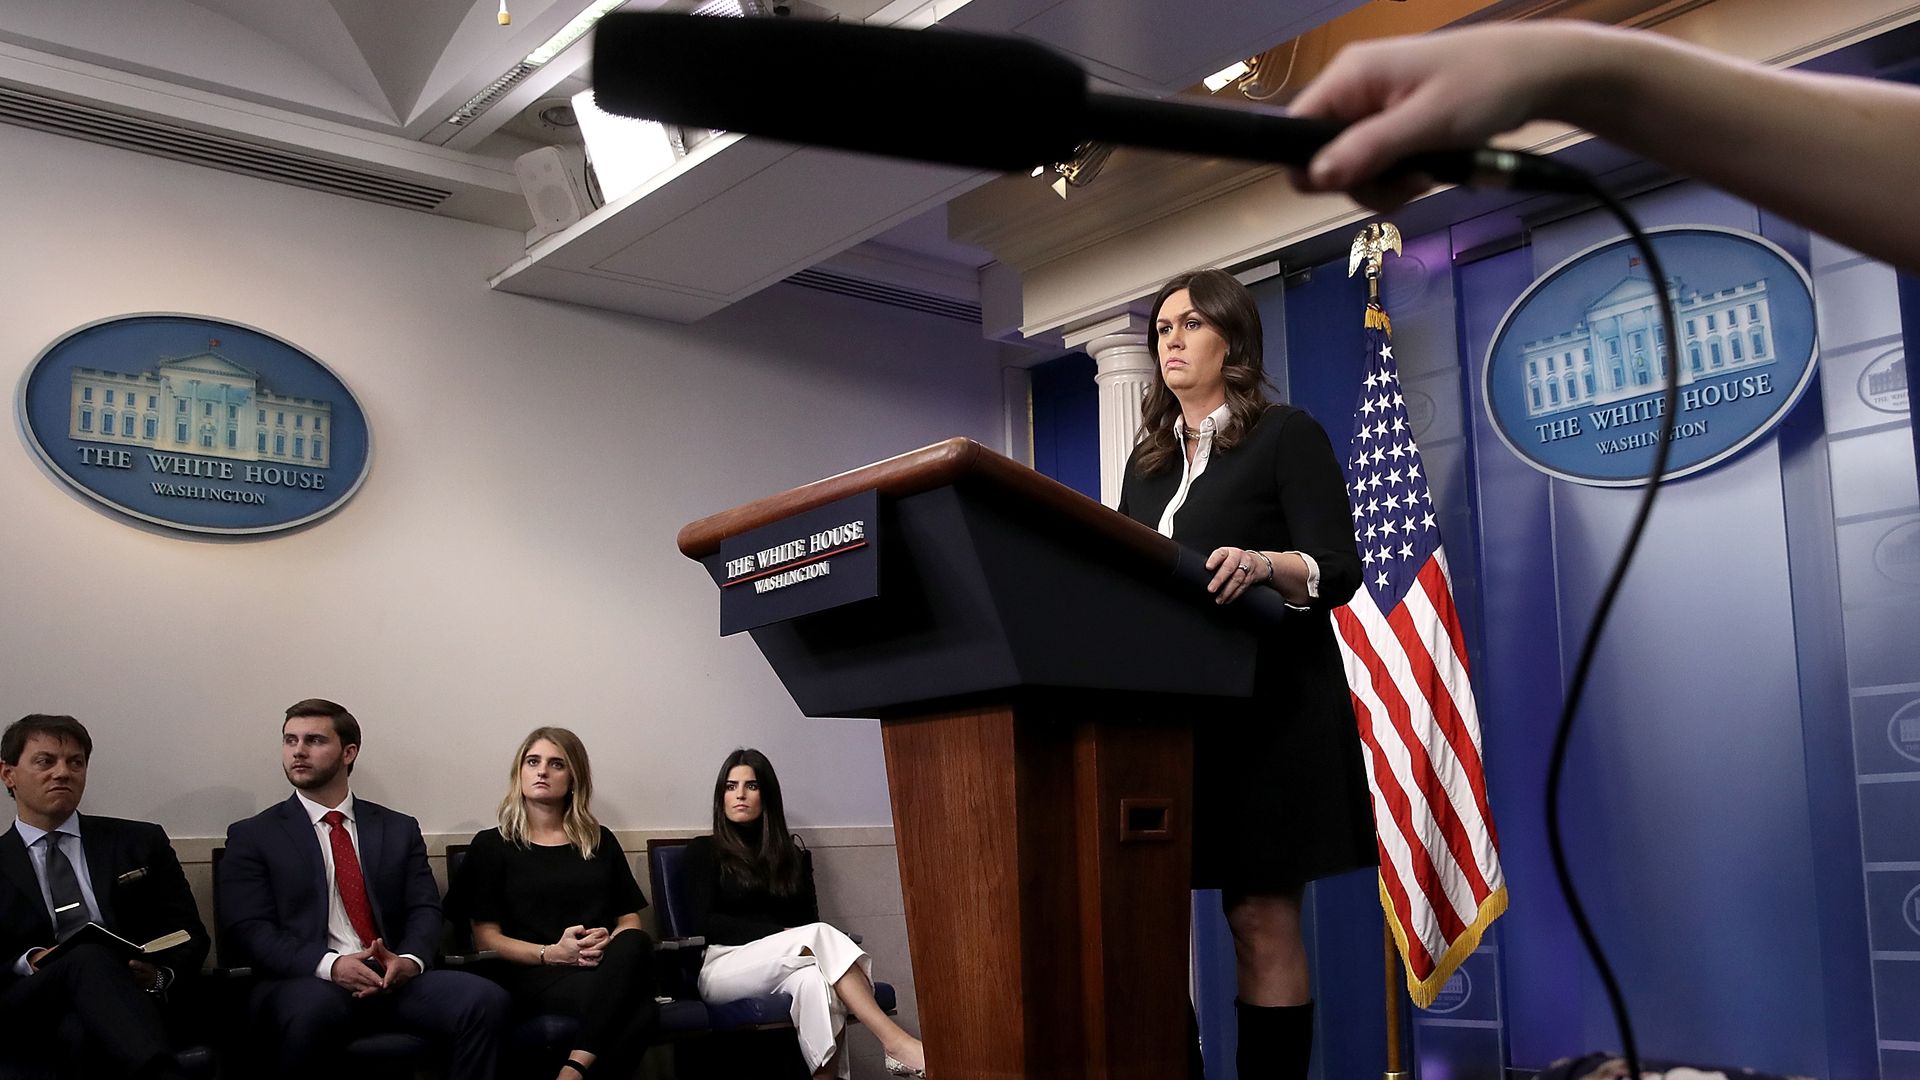 Sarah Sanders during the White House press briefing on January 17.